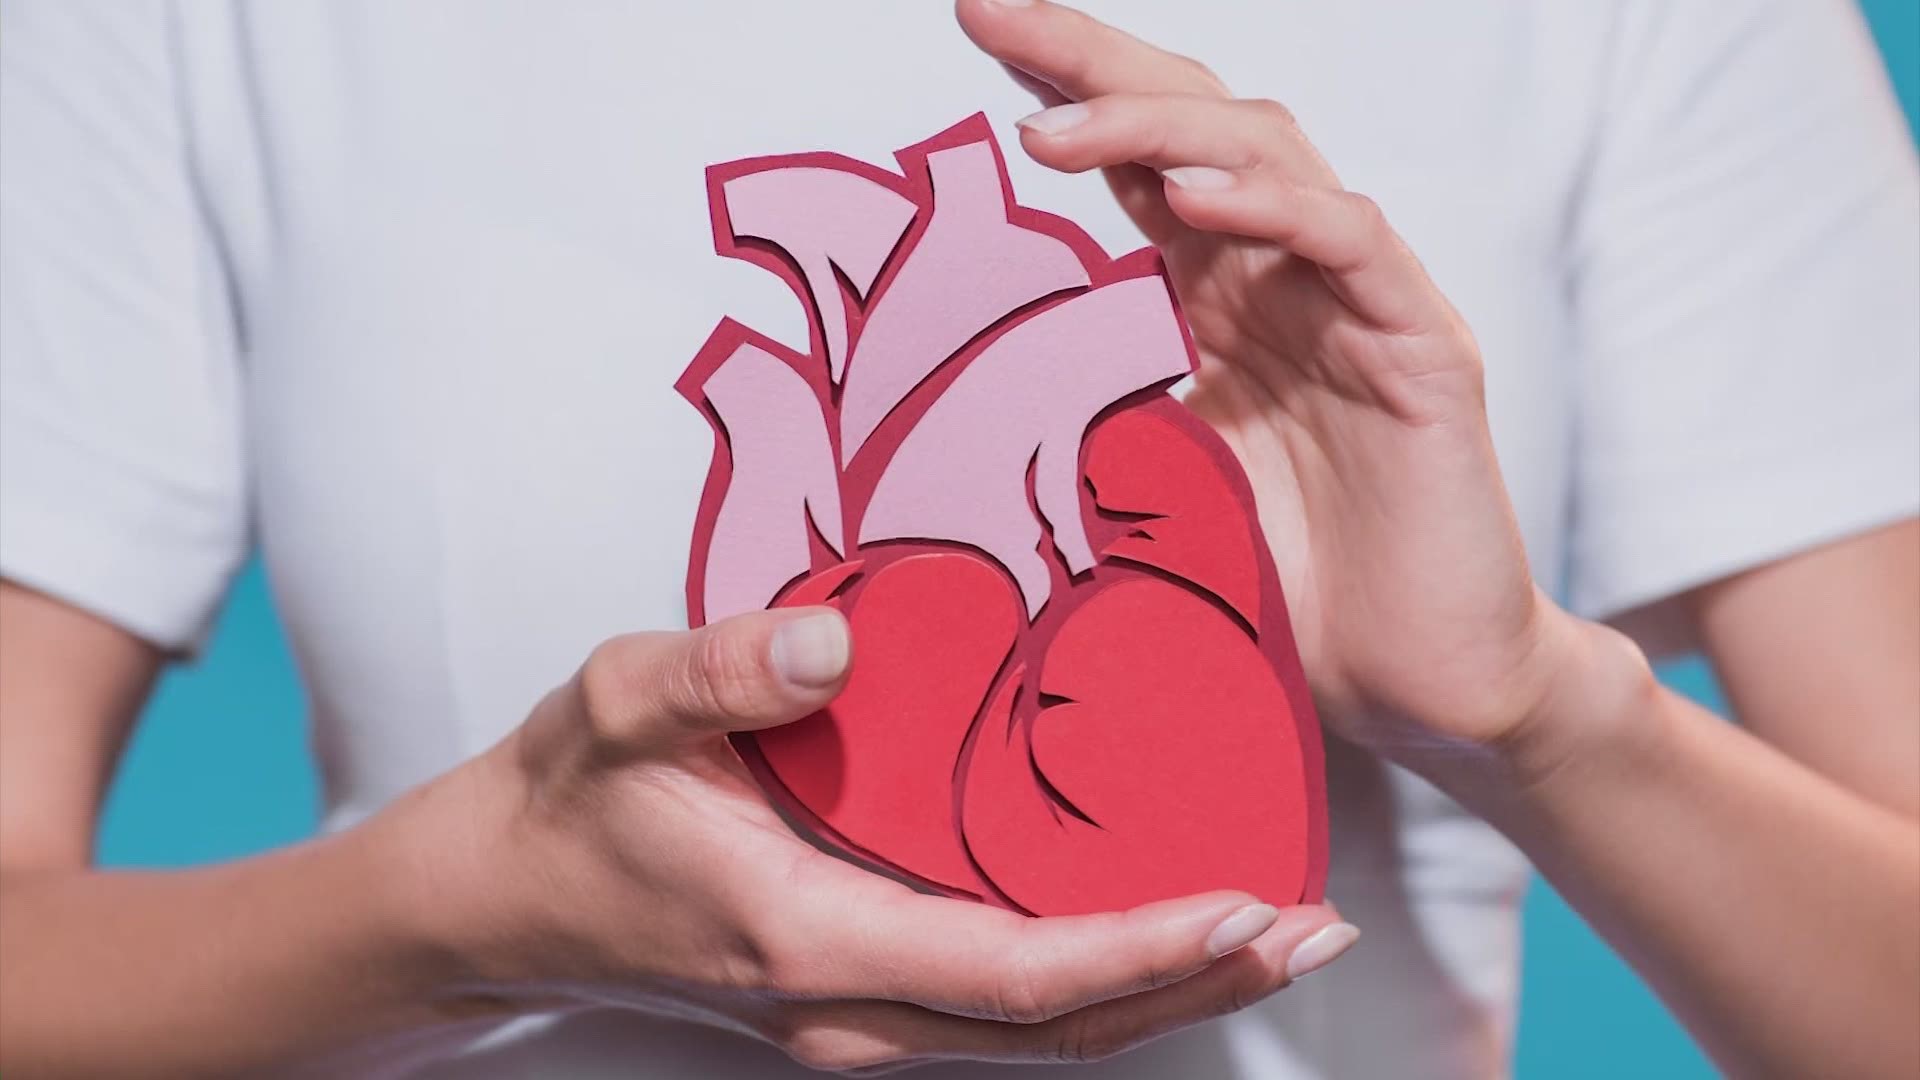 February is Heart Disease Awaress Month, and keeping up your heart health is crucial.